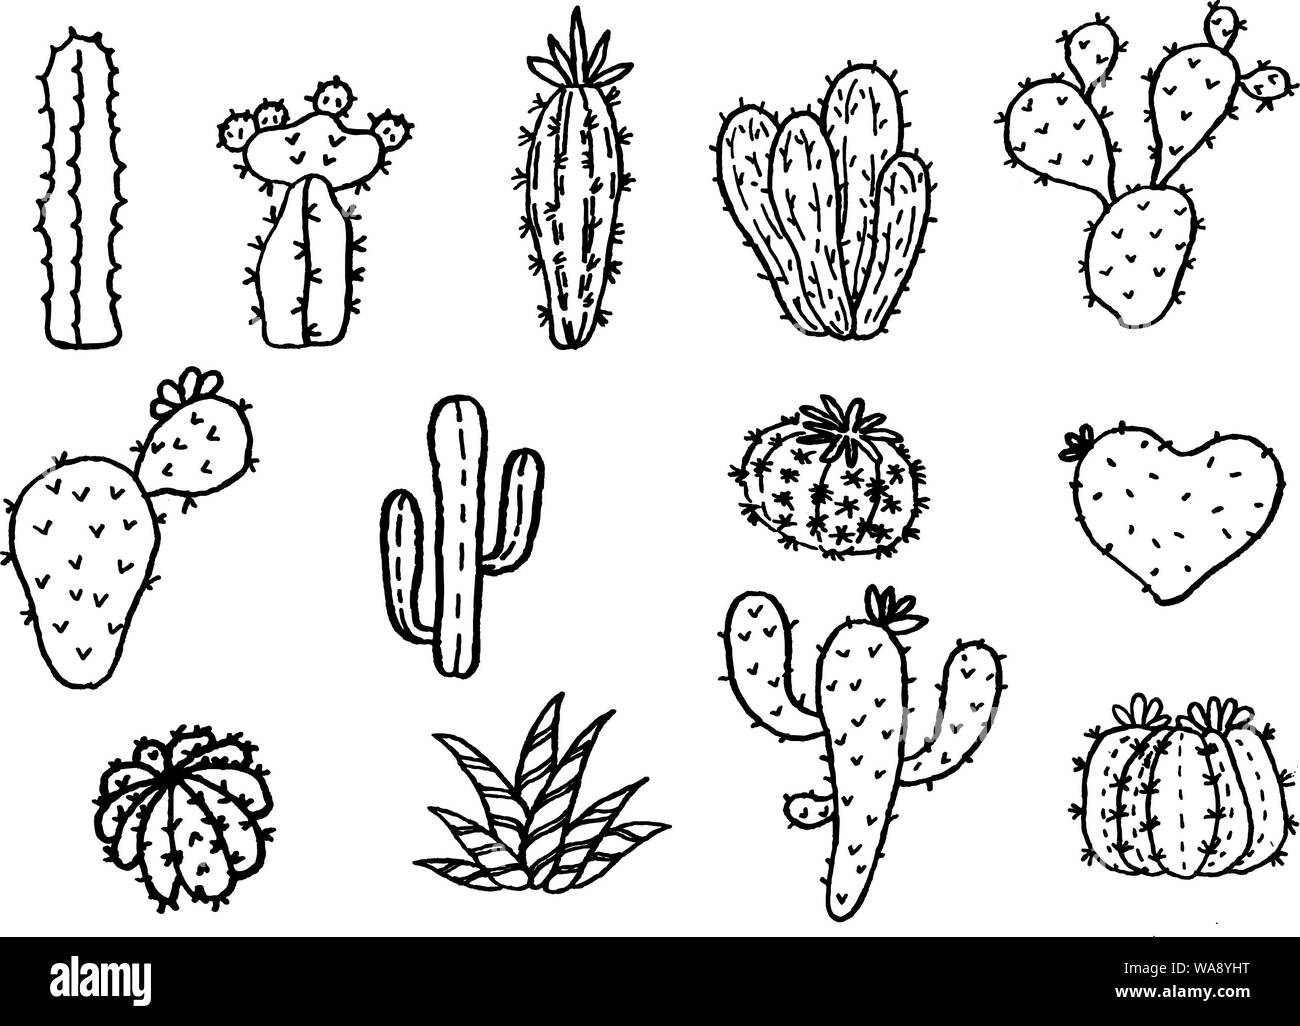 vector collection hand draw of cactus Stock Photo - Alamy